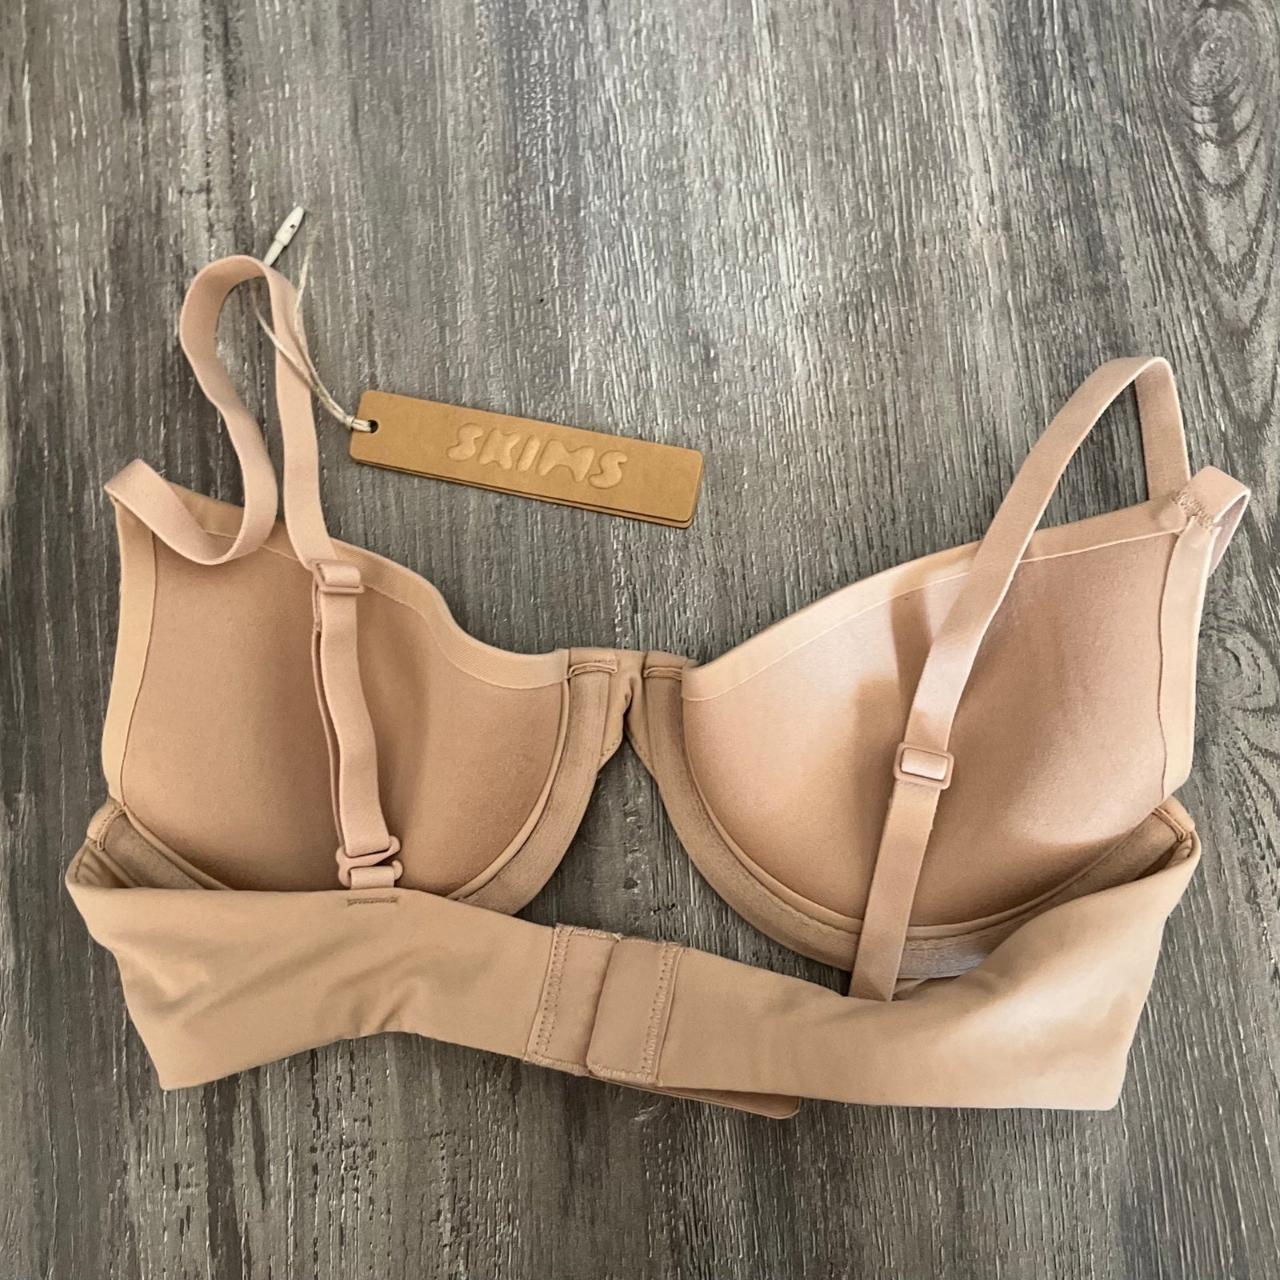 SKIMS Fits Everybody Underwire Bra 36C NWT Tan Size 36 C - $30 (42% Off  Retail) New With Tags - From Ali